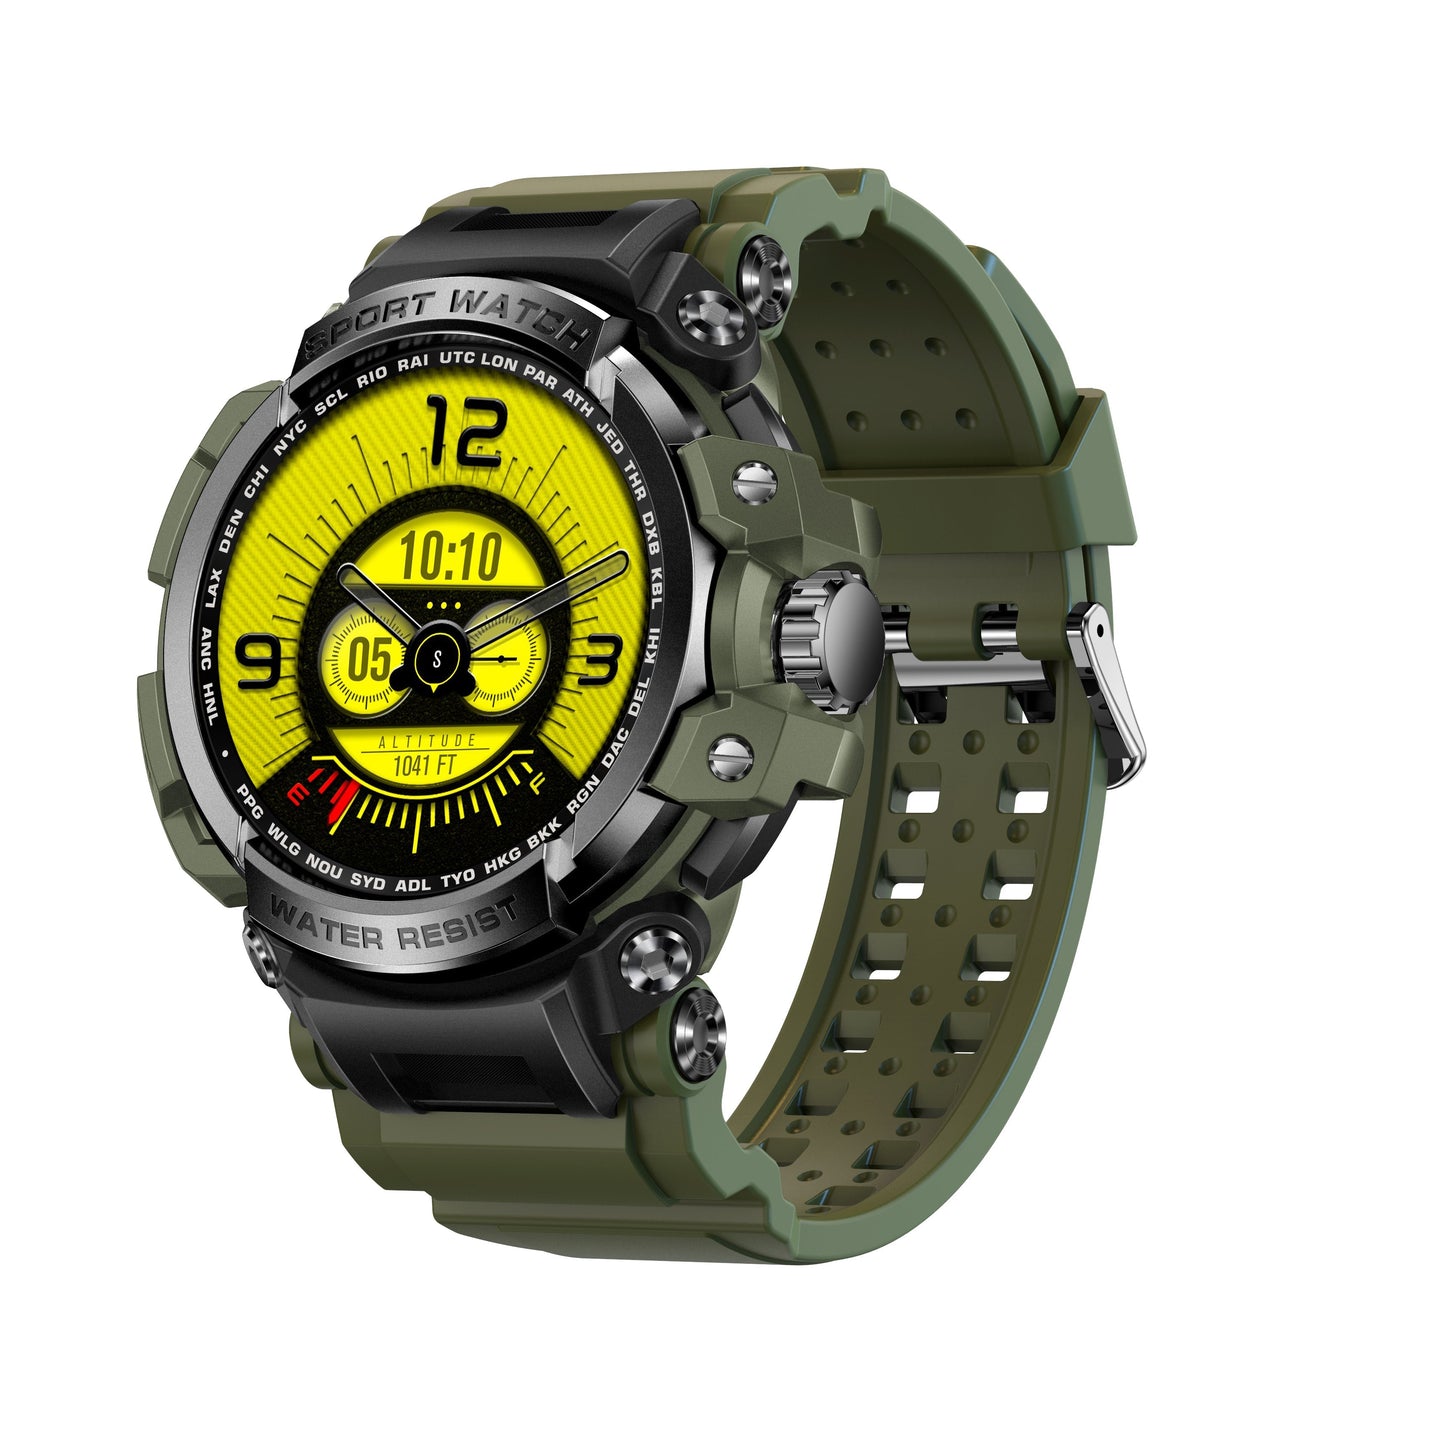 Rugged Warrior - The Durable Smartwatch